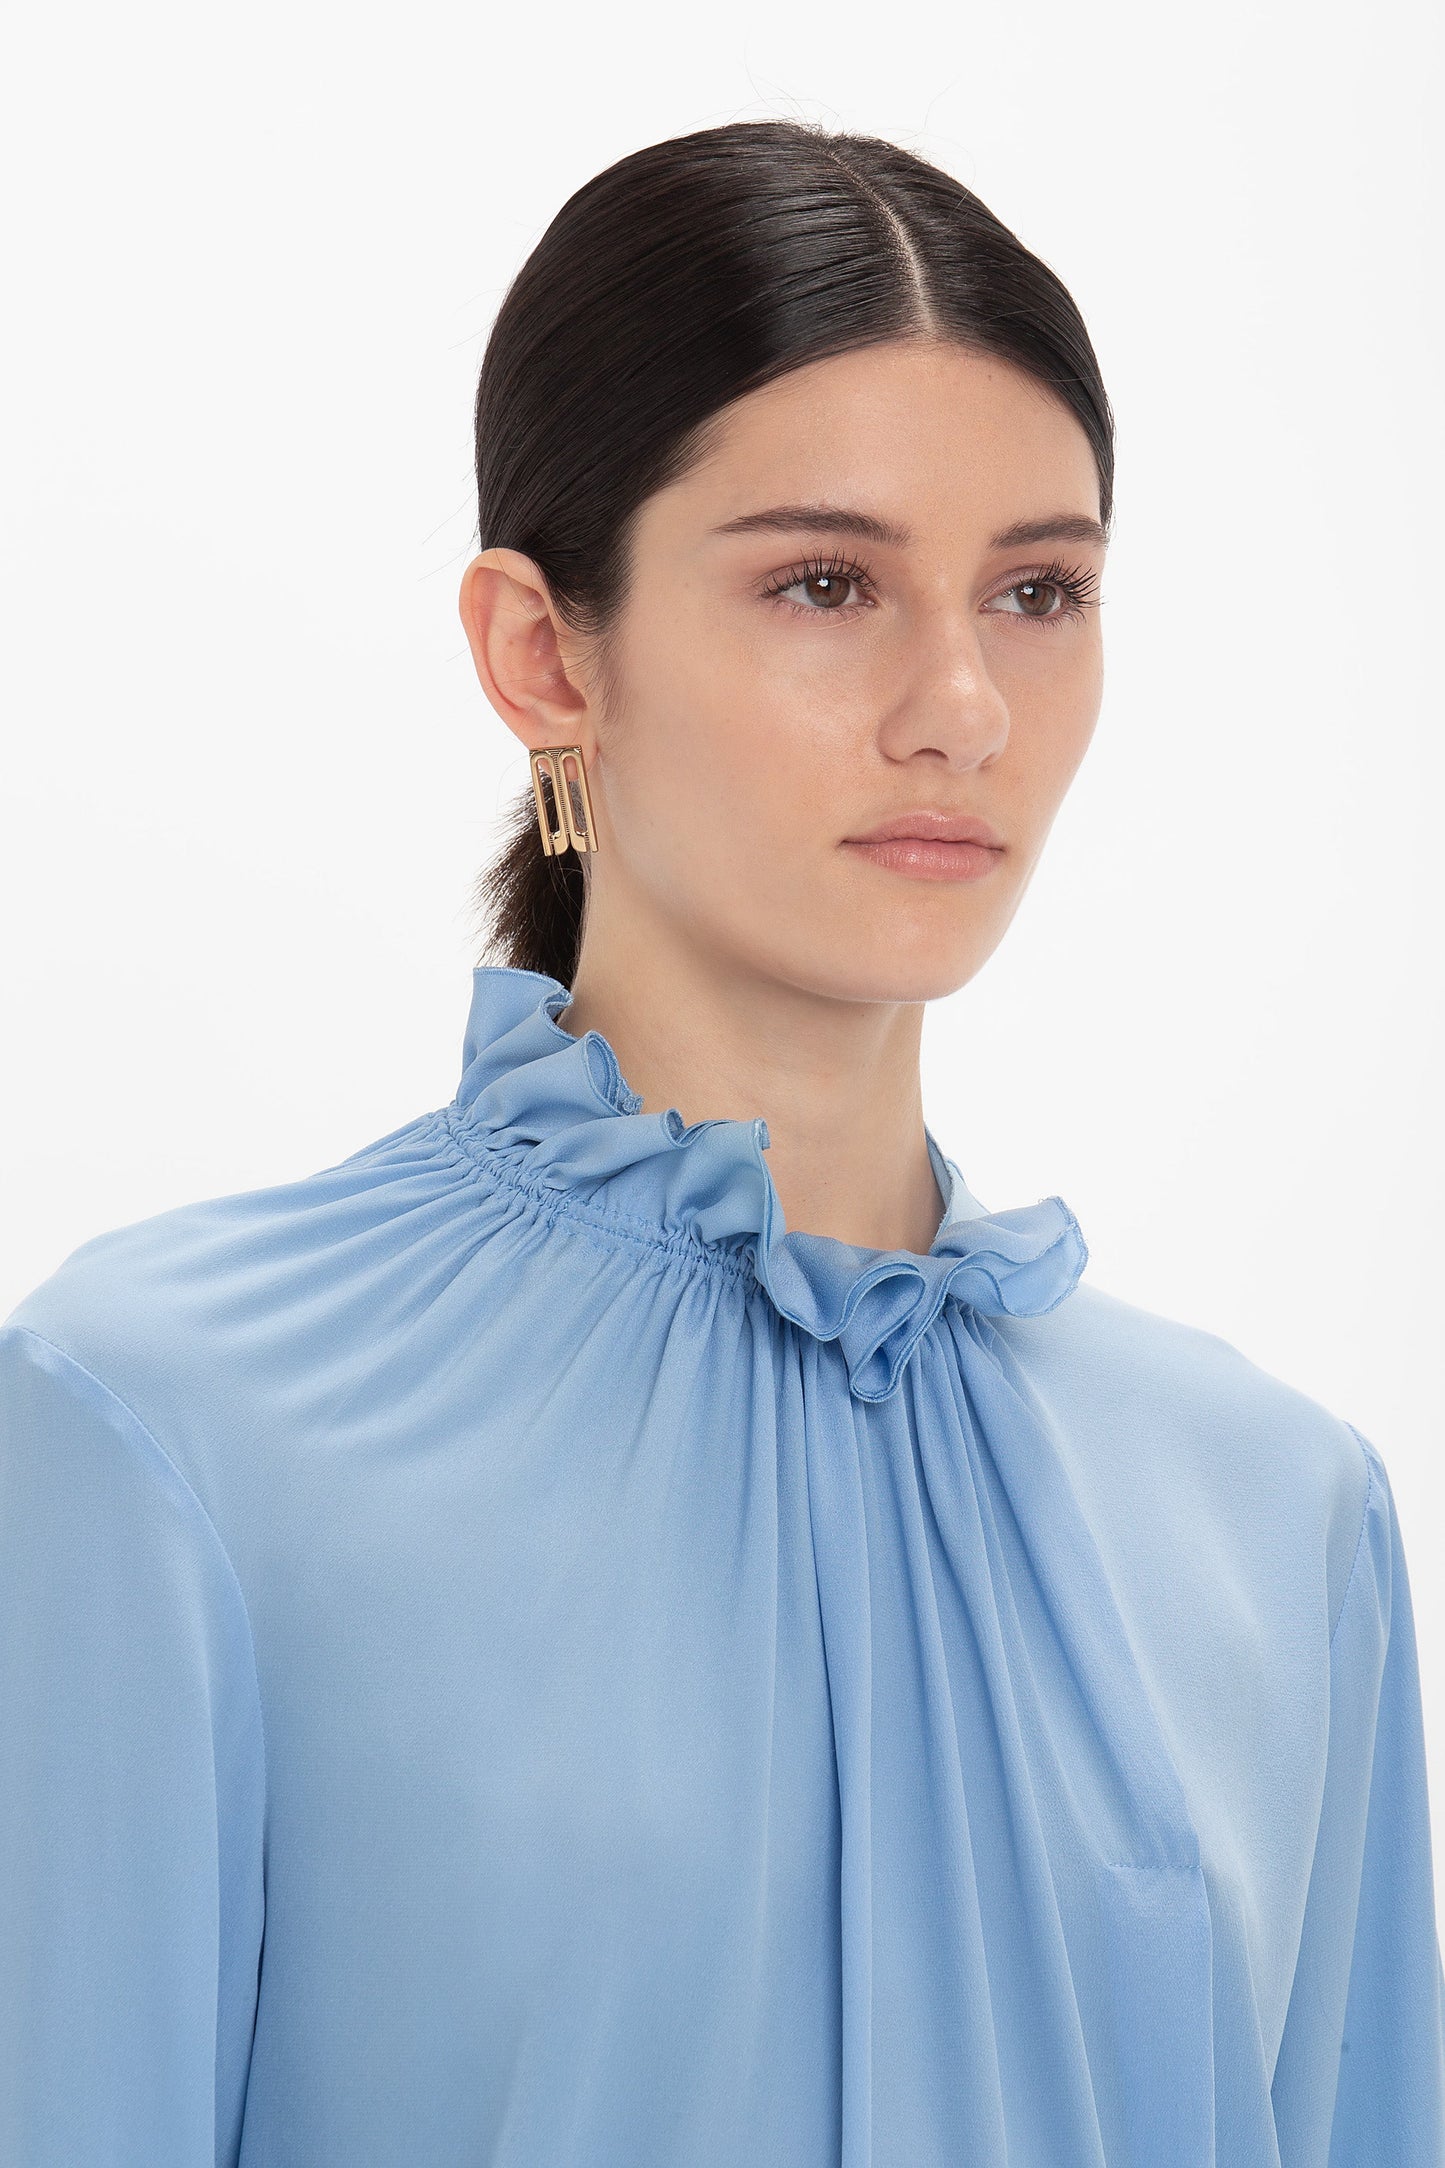 A person with dark hair tied back wearing a light blue crepe de chine fabric, Victoria Beckham Exclusive Ruffle Neck Blouse In Cornflower Blue and gold earrings against a white background.